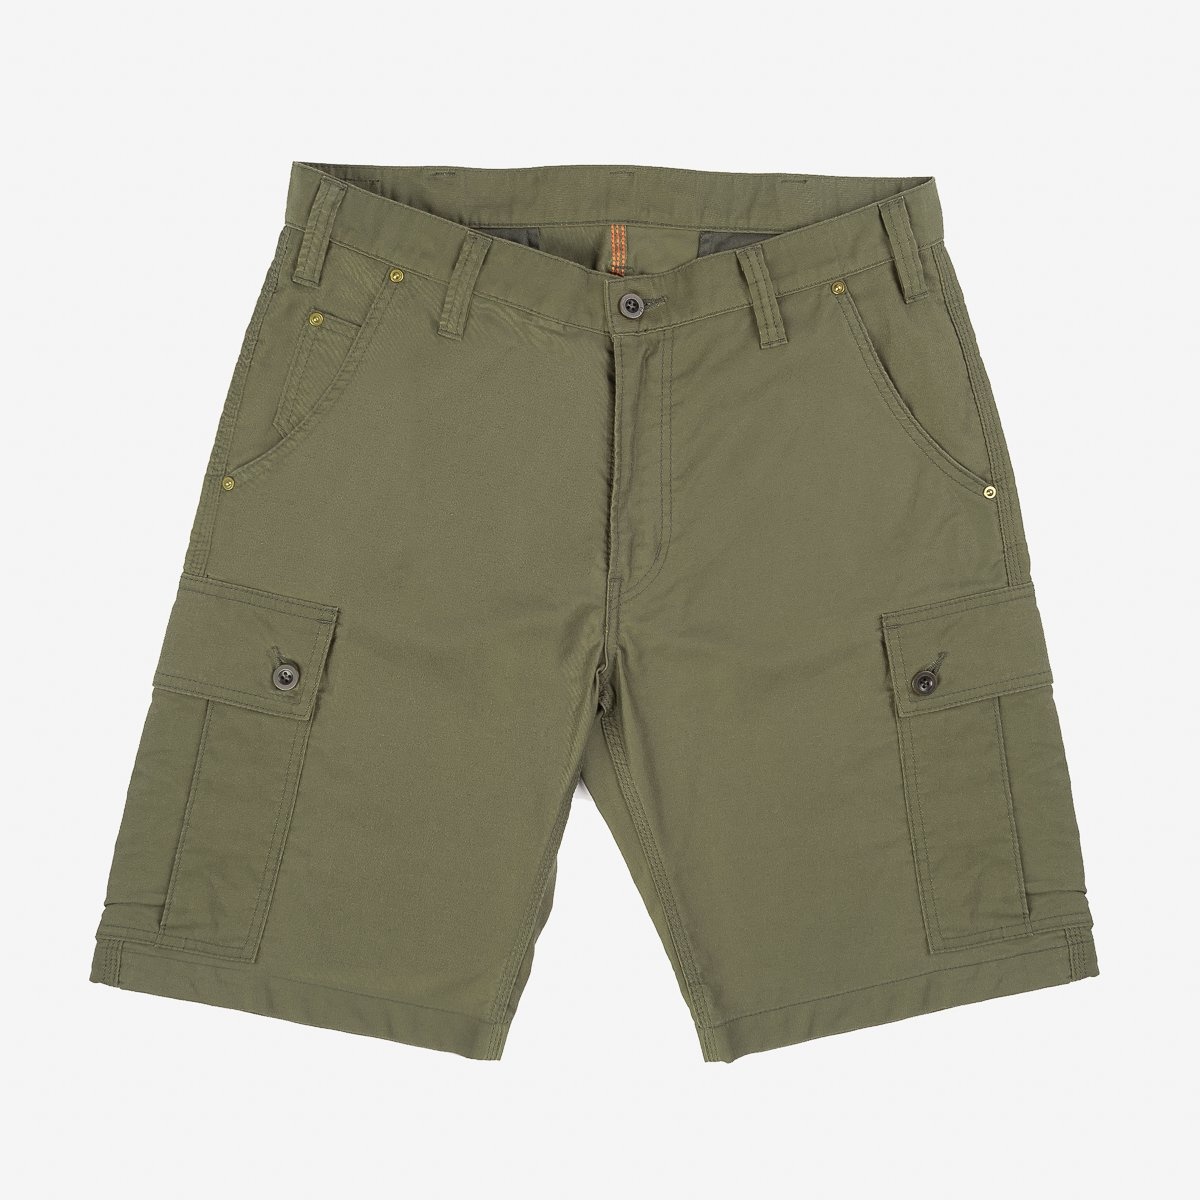 7.4oz Cotton Whipcord Camp Shorts - Olive - 1